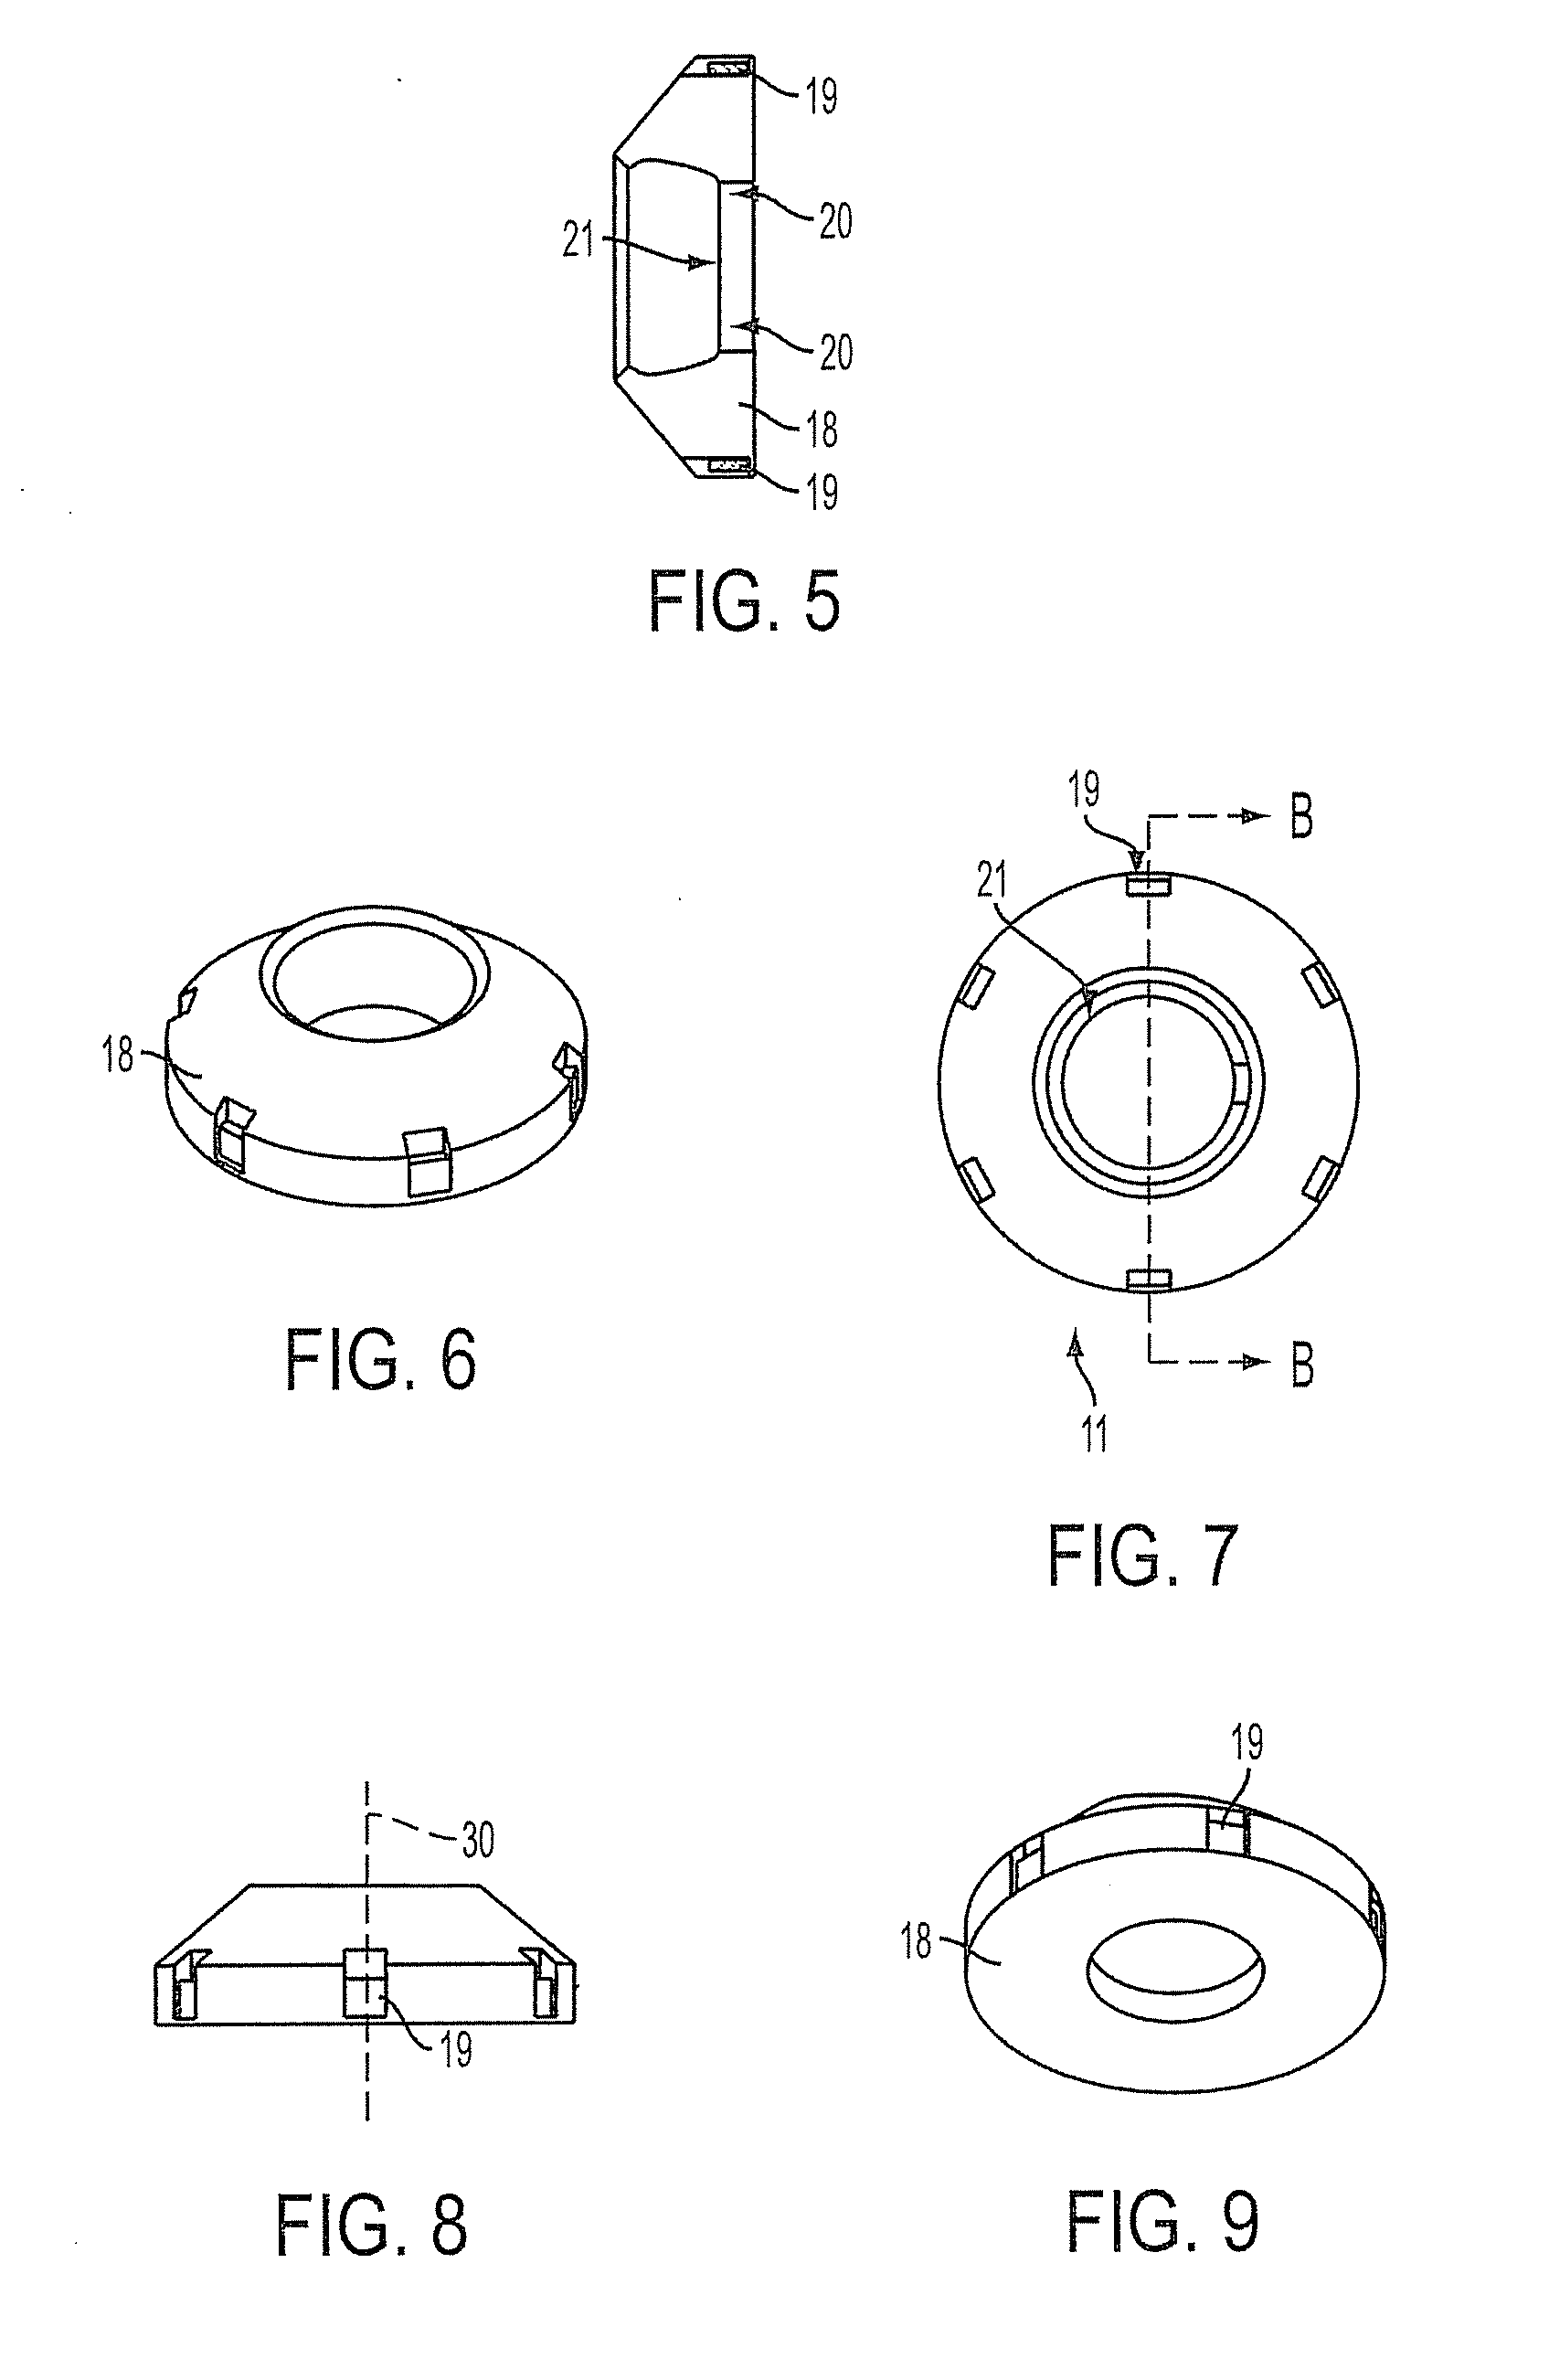 Aesthetic treatment device and method